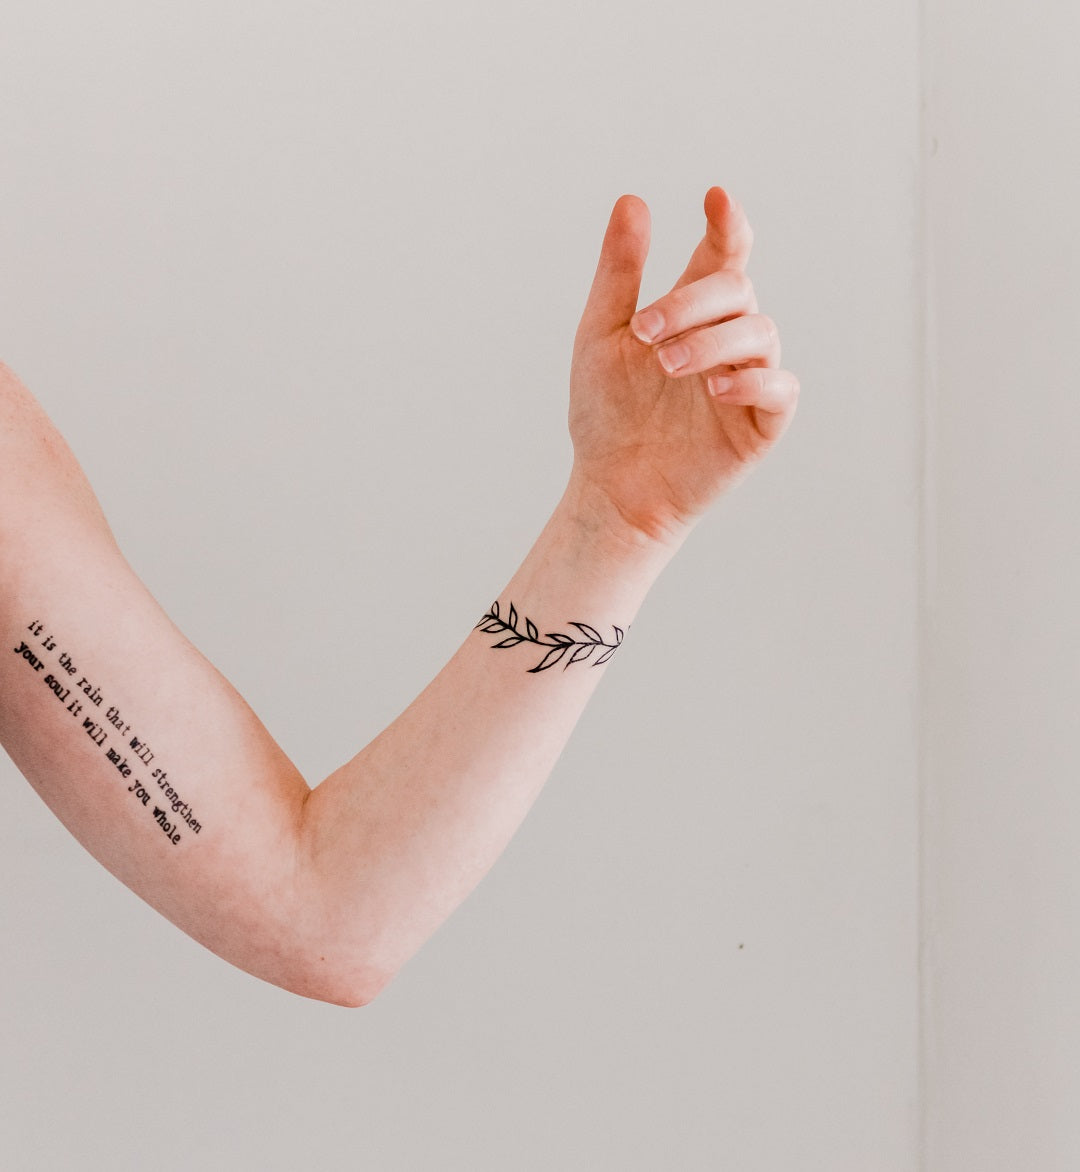 How to Choose The Best Font For Your Tattoo